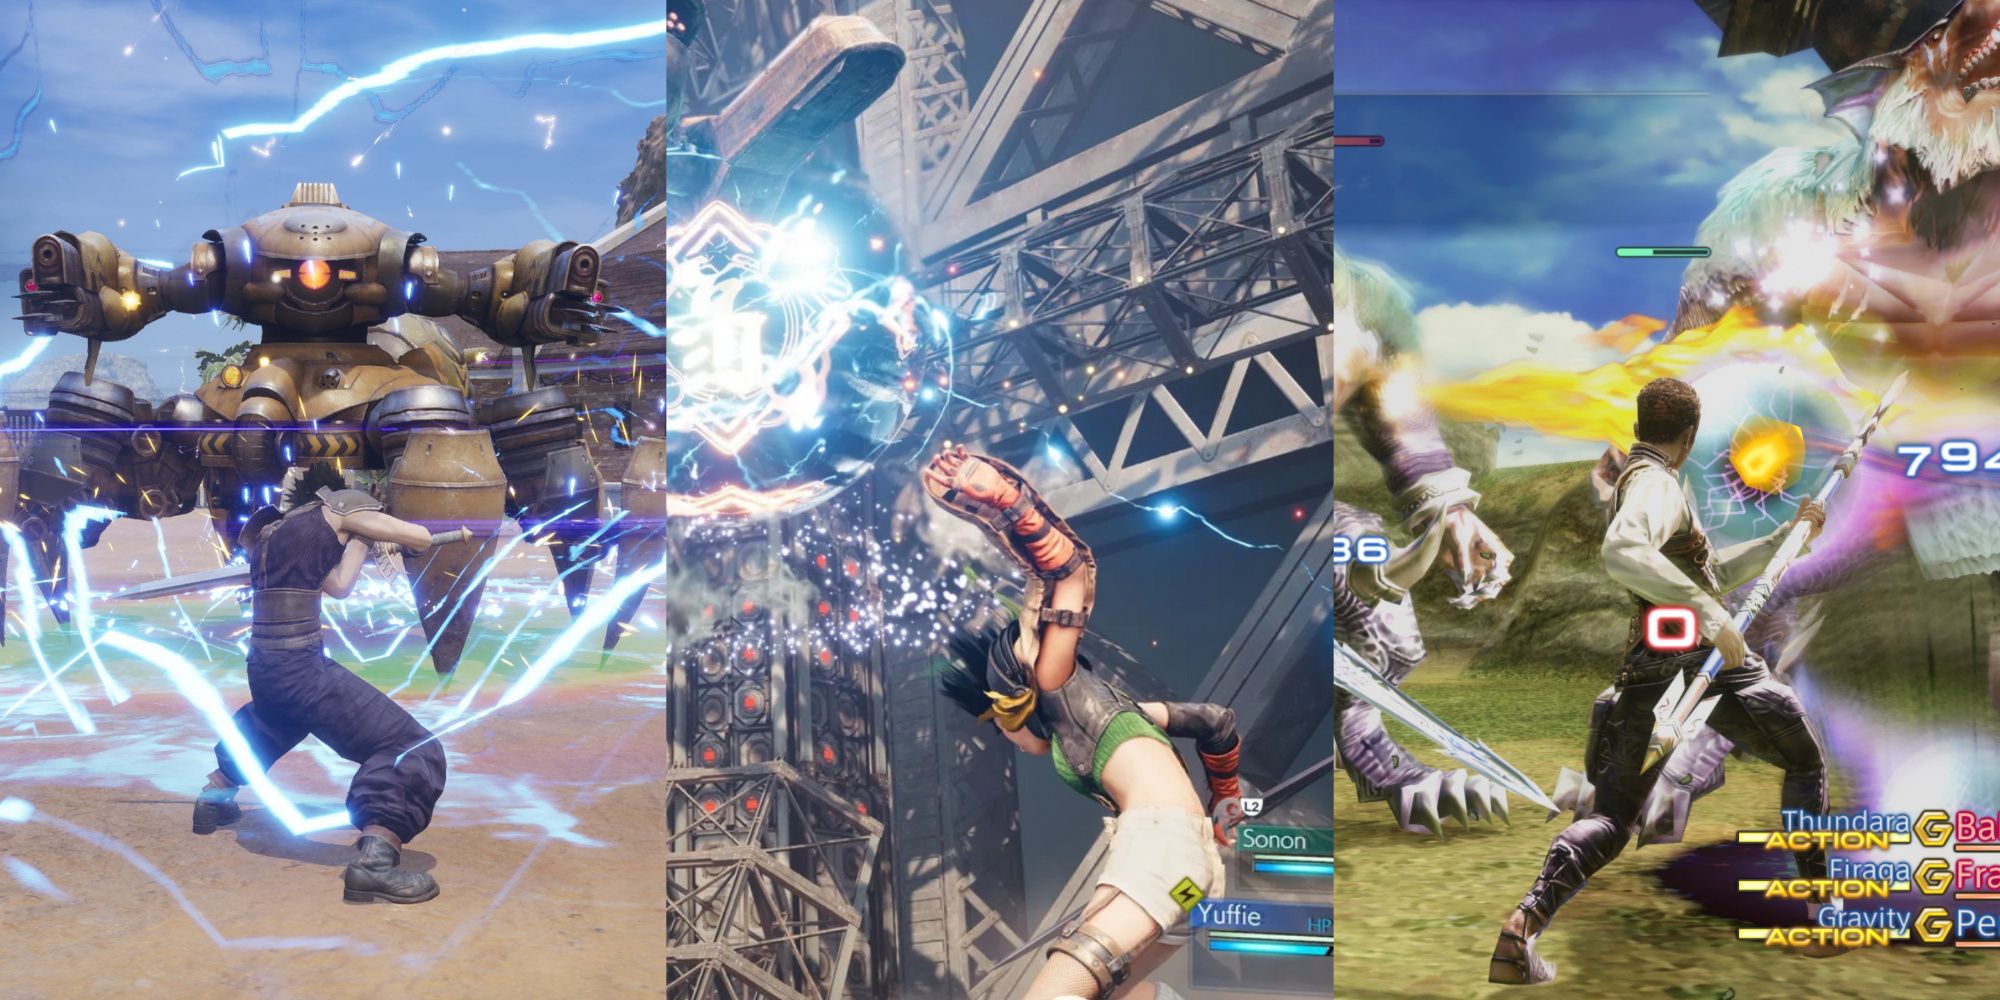 3 final fantasy games and their battle systems in action